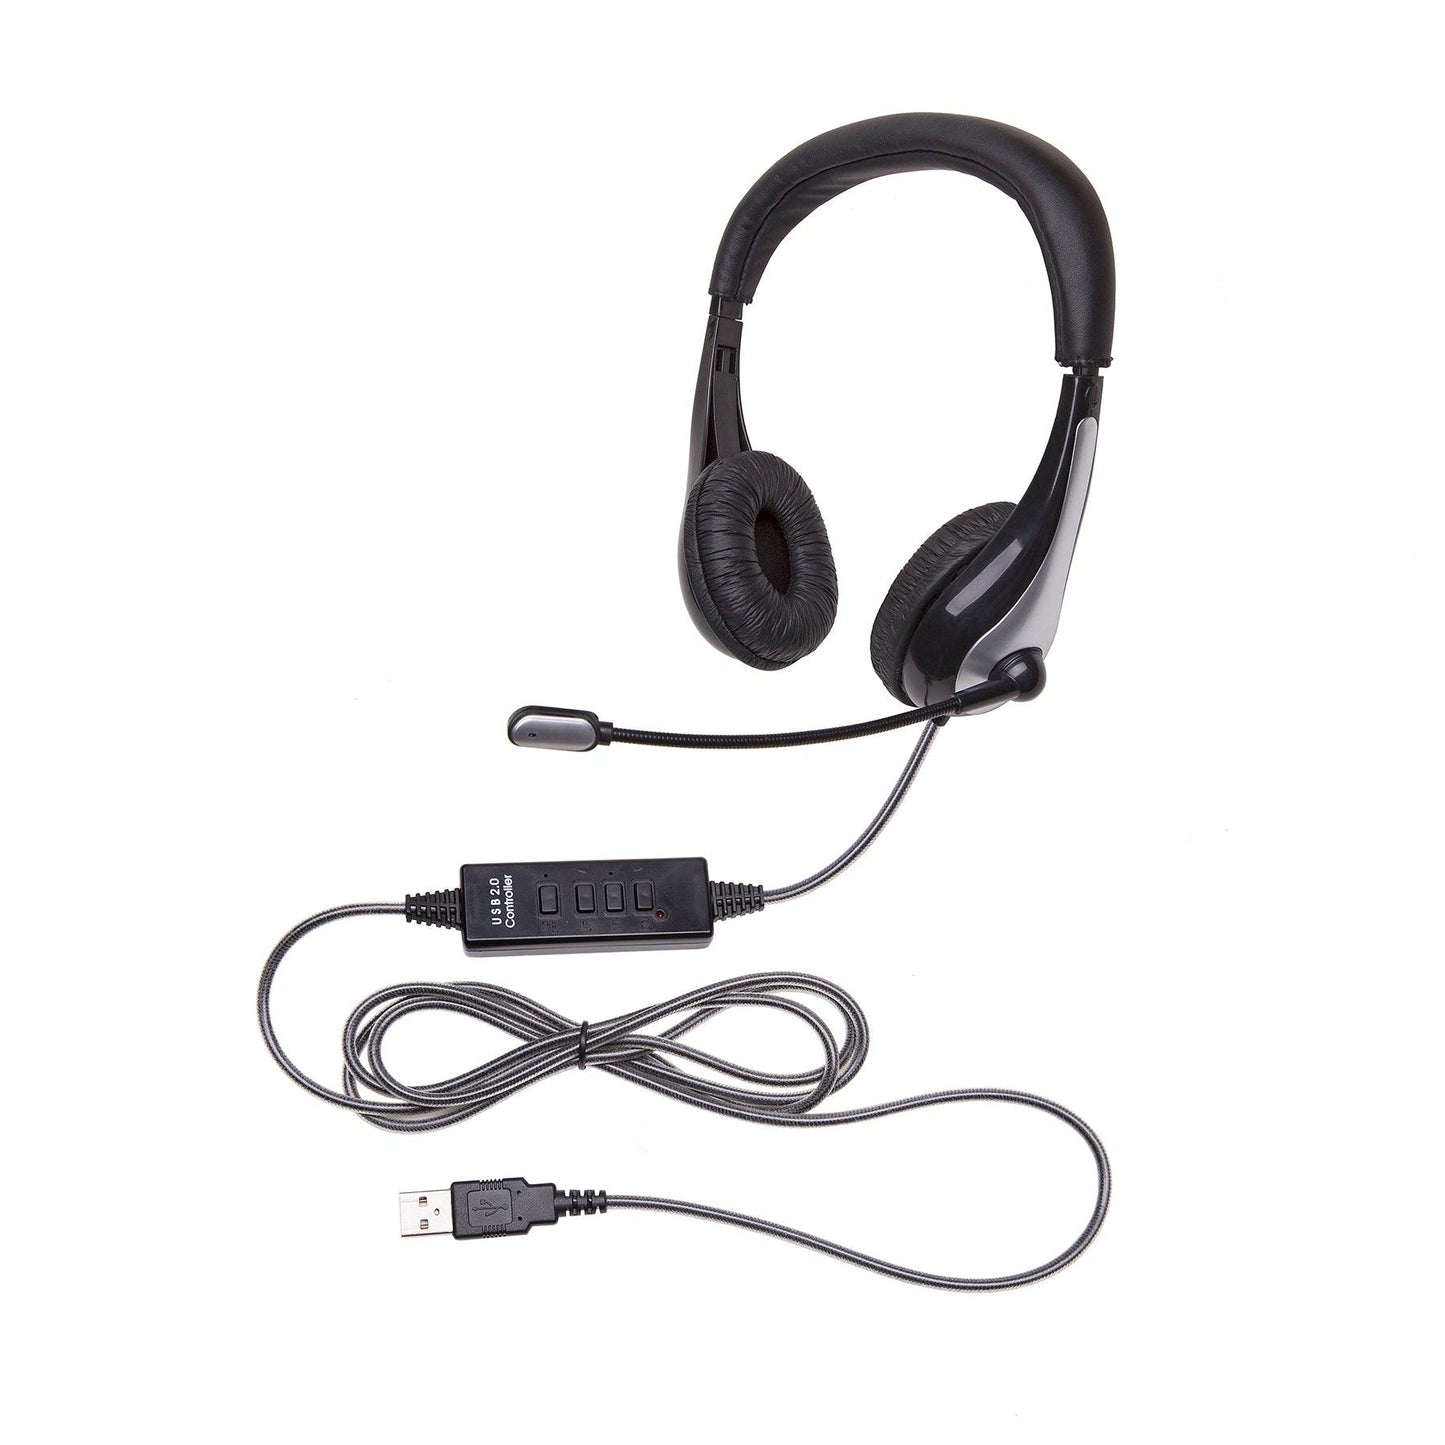 NeoTech 1025MUSB On-Ear Stereo Headset with Gooseneck Microphone, USB Plug, Black/Silver - Loomini